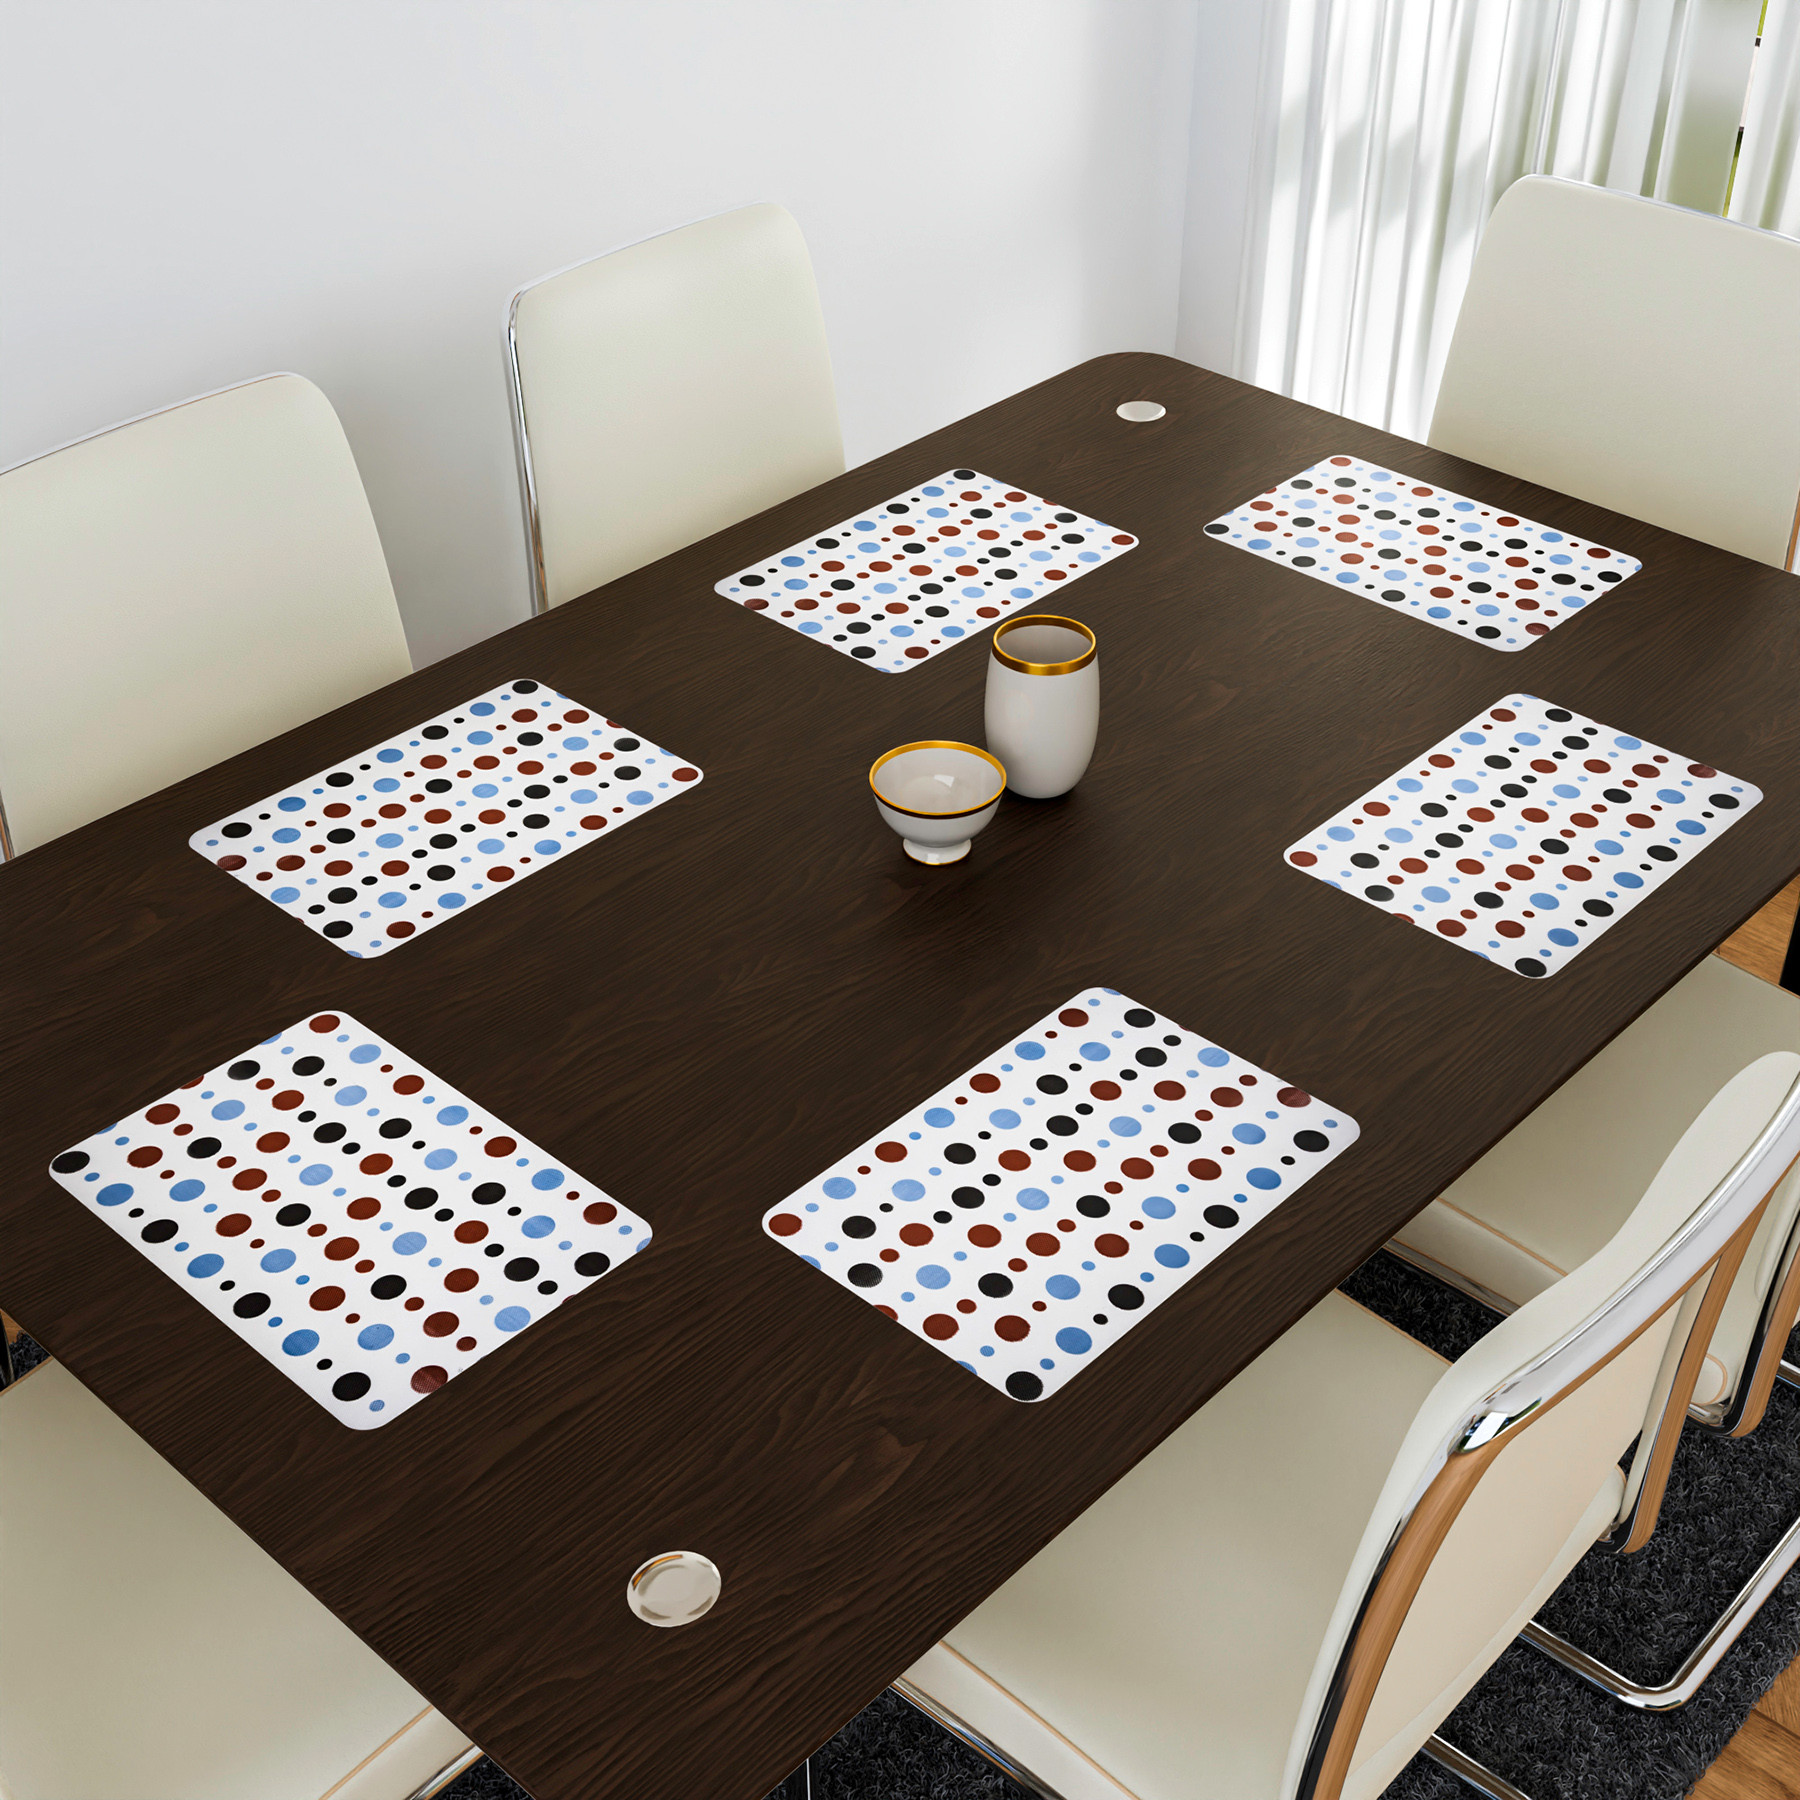 Kuber Industries Placemat | Placemats for Dining Room | Anti-Slip Table Mat Set | Placemats for Kitchen Table | Dining Table Placemats | Multi Dot Placemat | 6 Piece Set | White